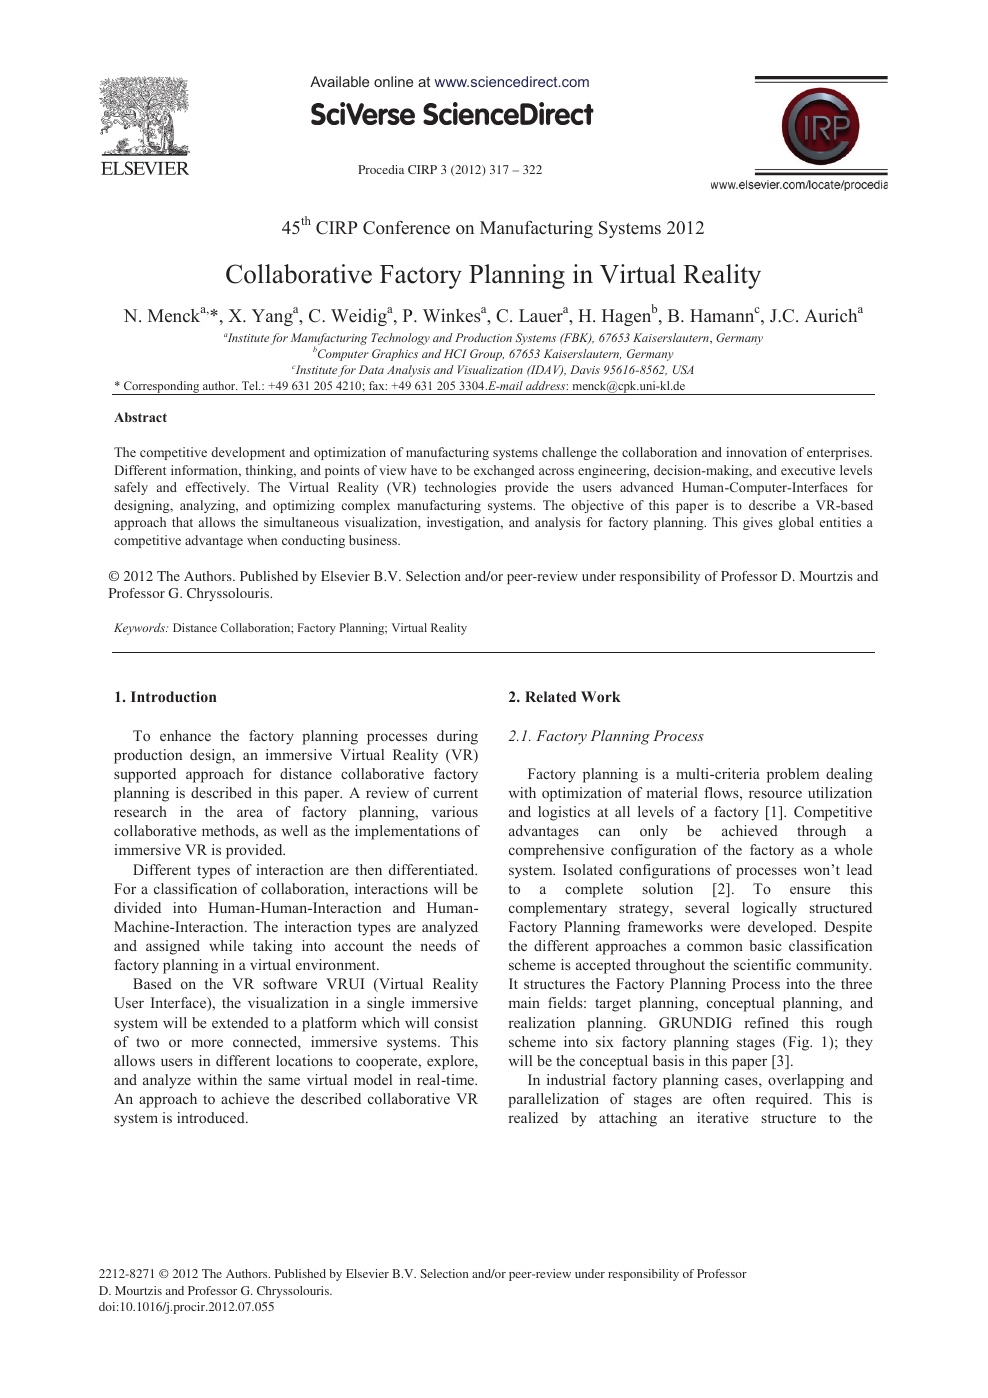 Collaborative Factory Planning In Virtual Reality Topic Of Research Paper In Computer And Information Sciences Download Scholarly Article Pdf And Read For Free On Cyberleninka Open Science Hub